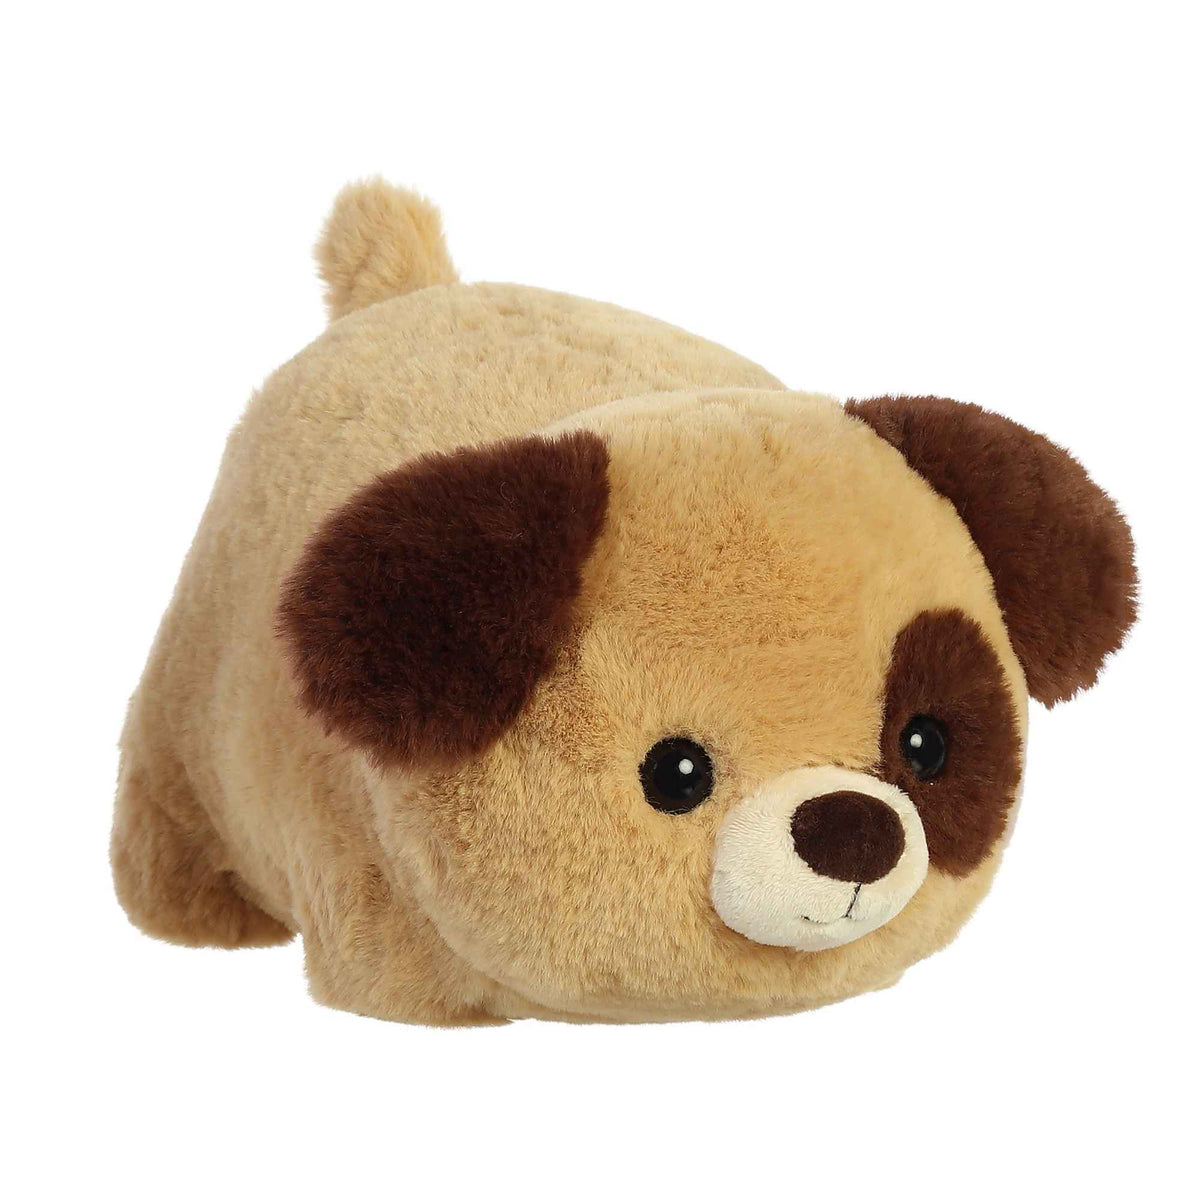 Doodle Dog plush from the Spudsters Collection by Aurora, with soft light brown fur and a lovable expression